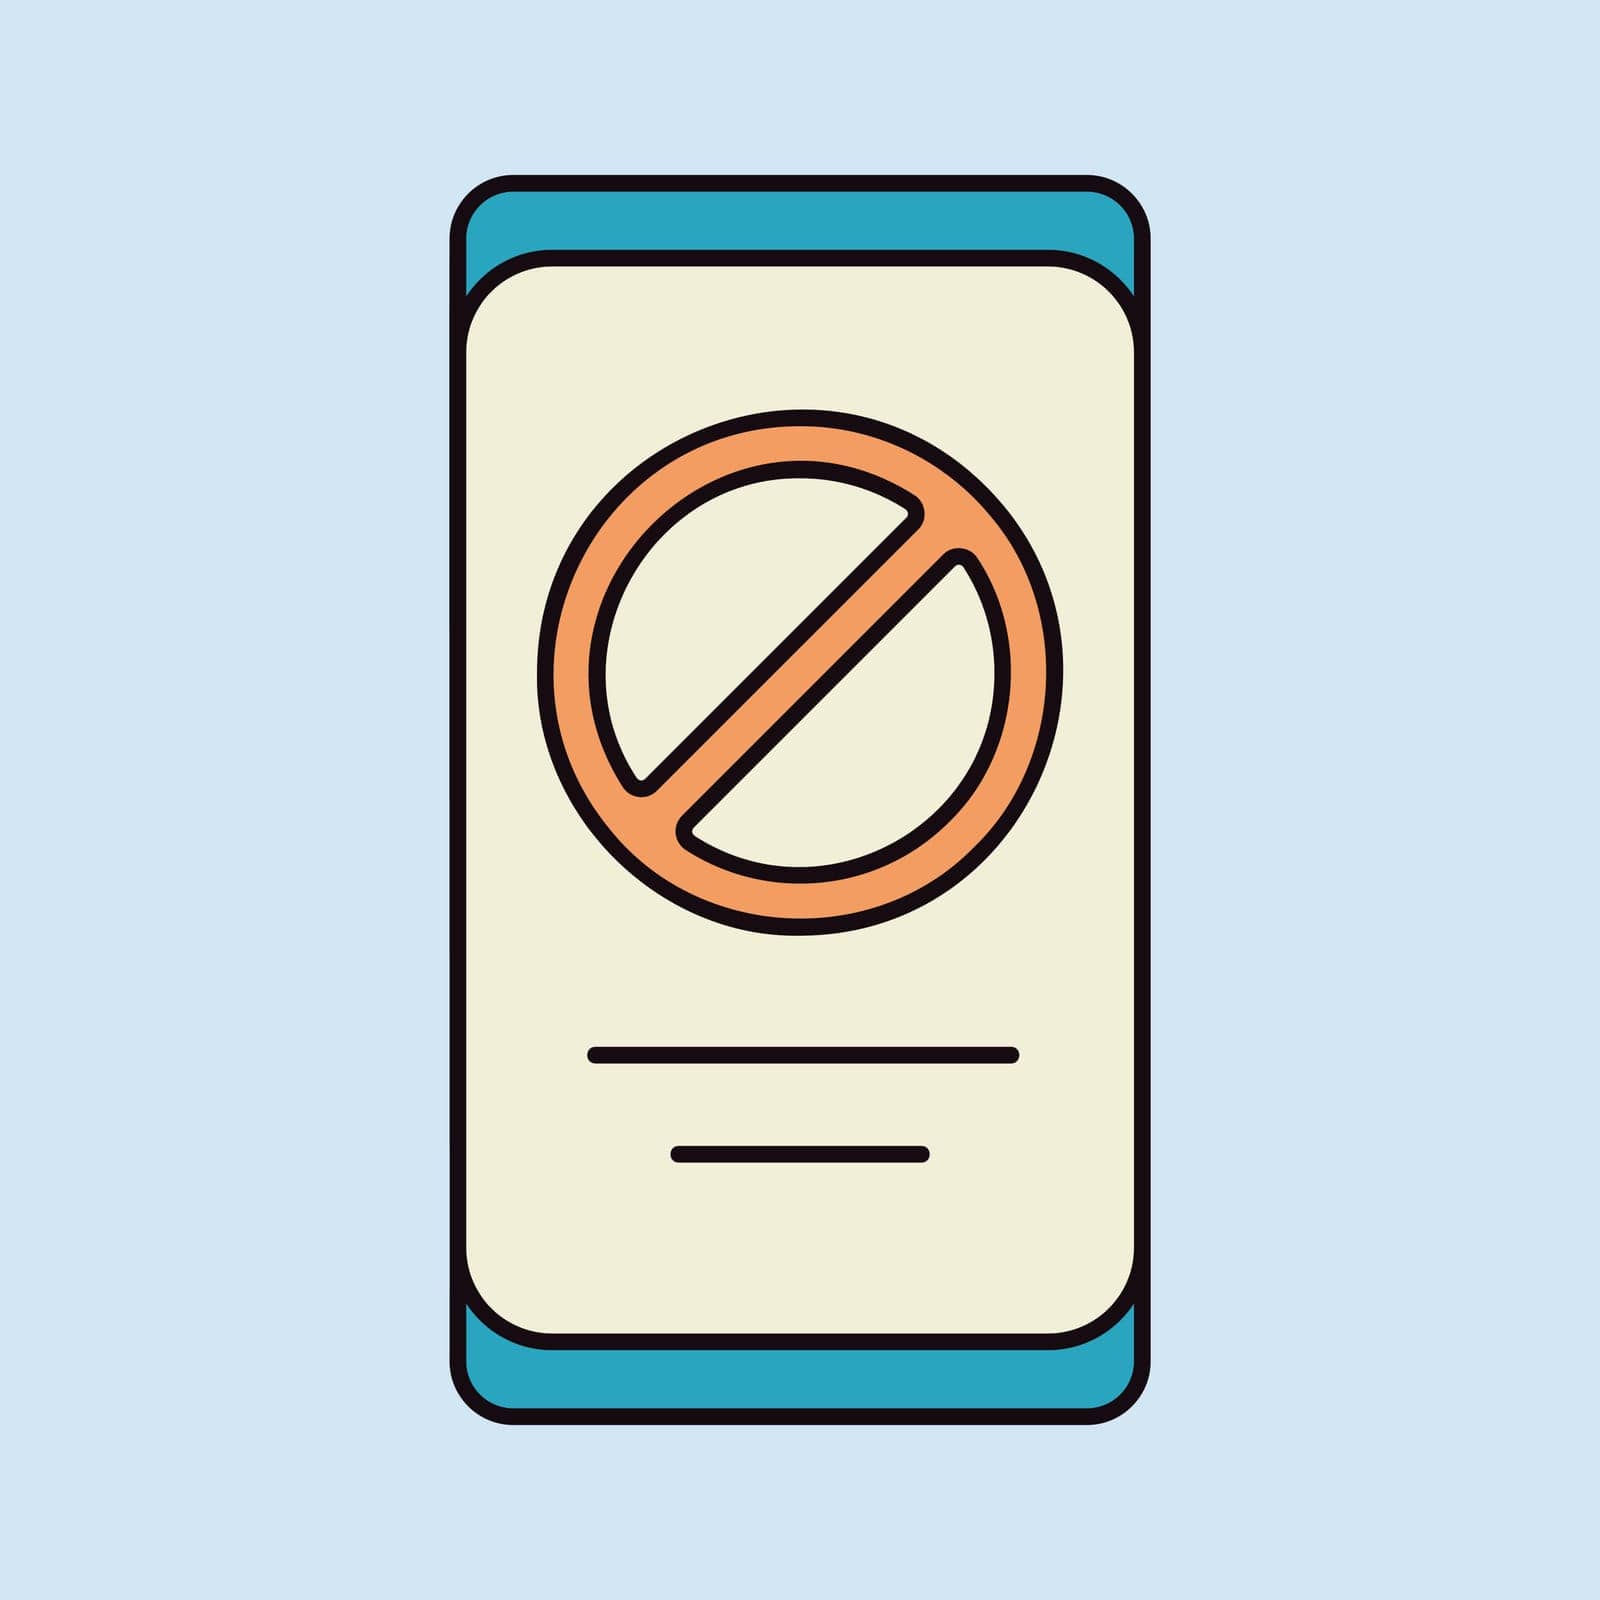 Prohibition sign on smartphone screen vector isolated icon. Demonstration, protest, strike, revolution